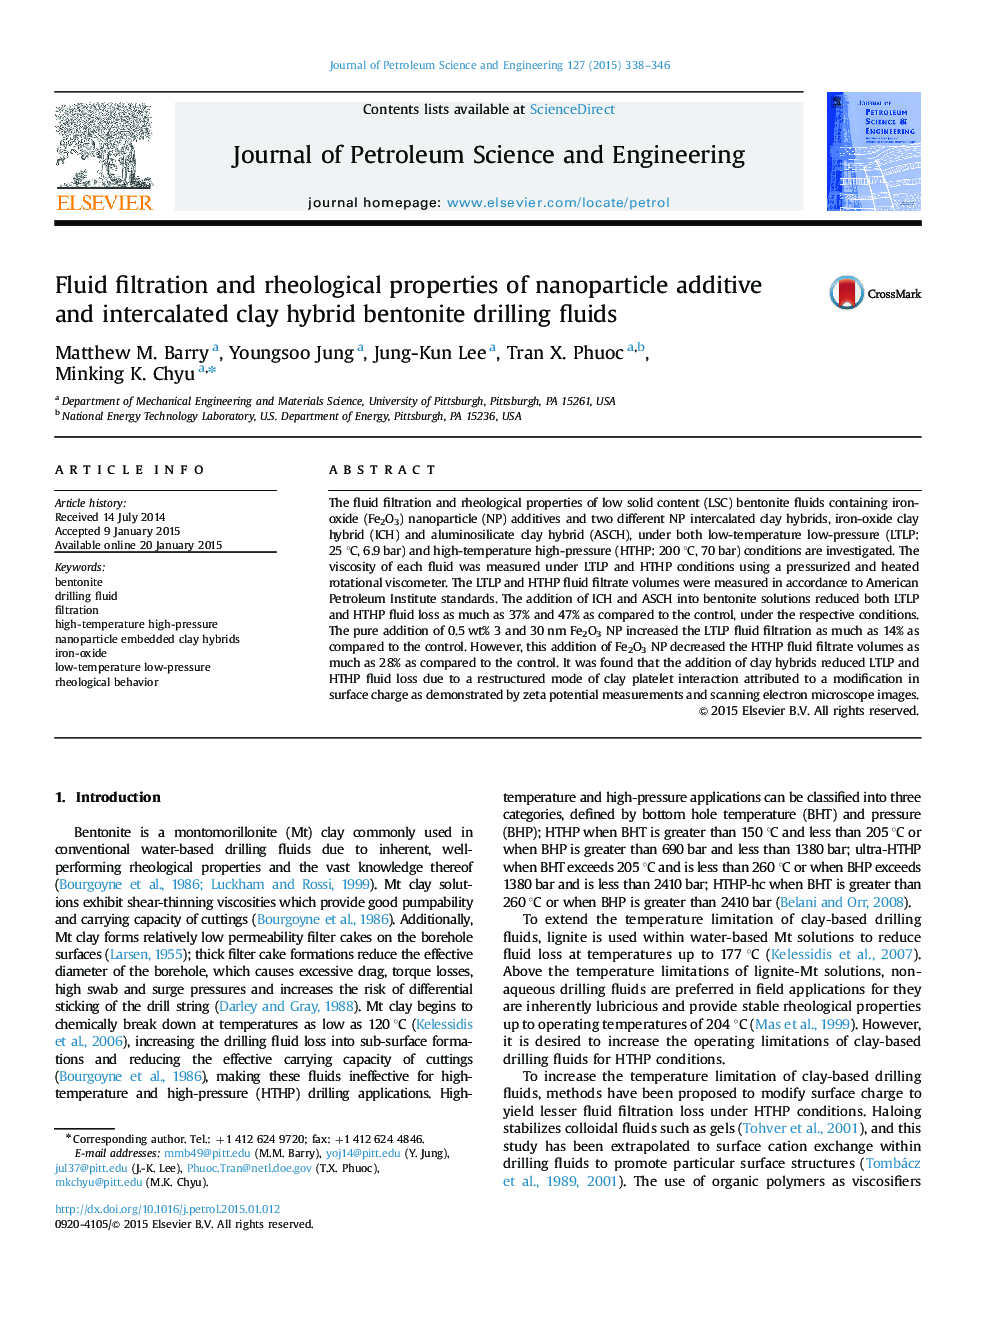 Fluid filtration and rheological properties of nanoparticle additive and intercalated clay hybrid bentonite drilling fluids